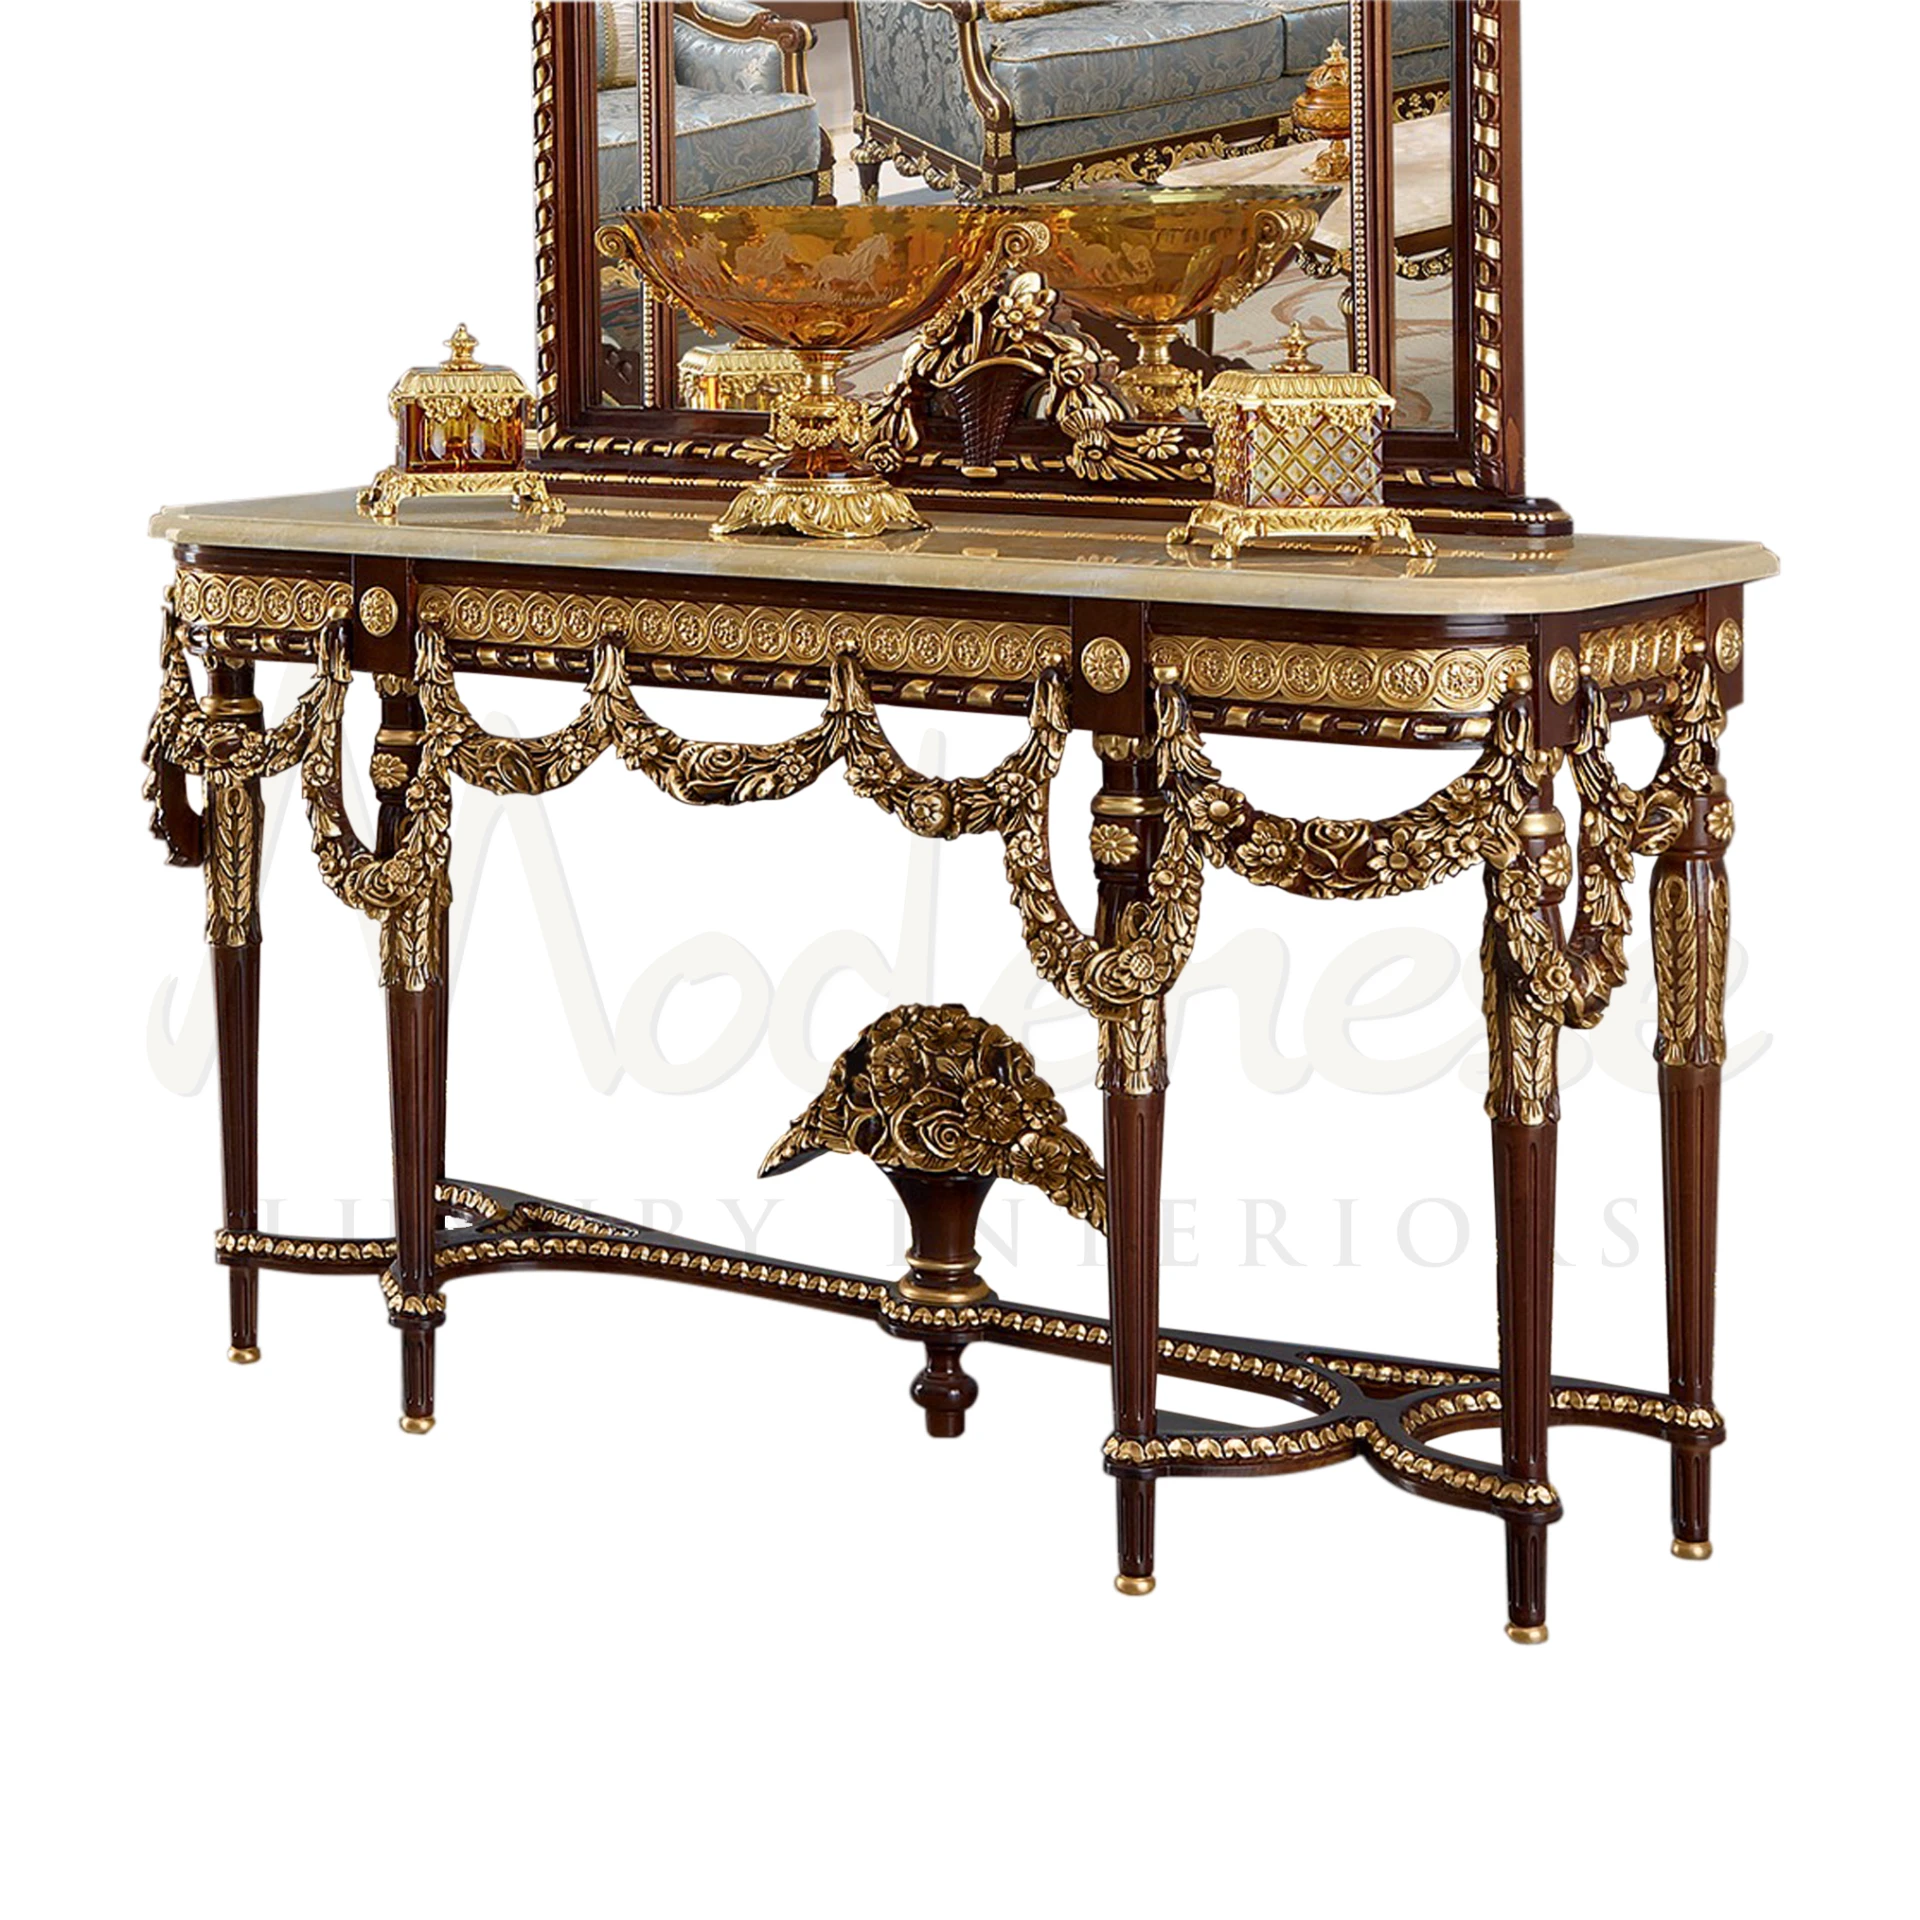 Opulent Empire Console with gold leaf finish, hand-carved details, and marble countertop options.